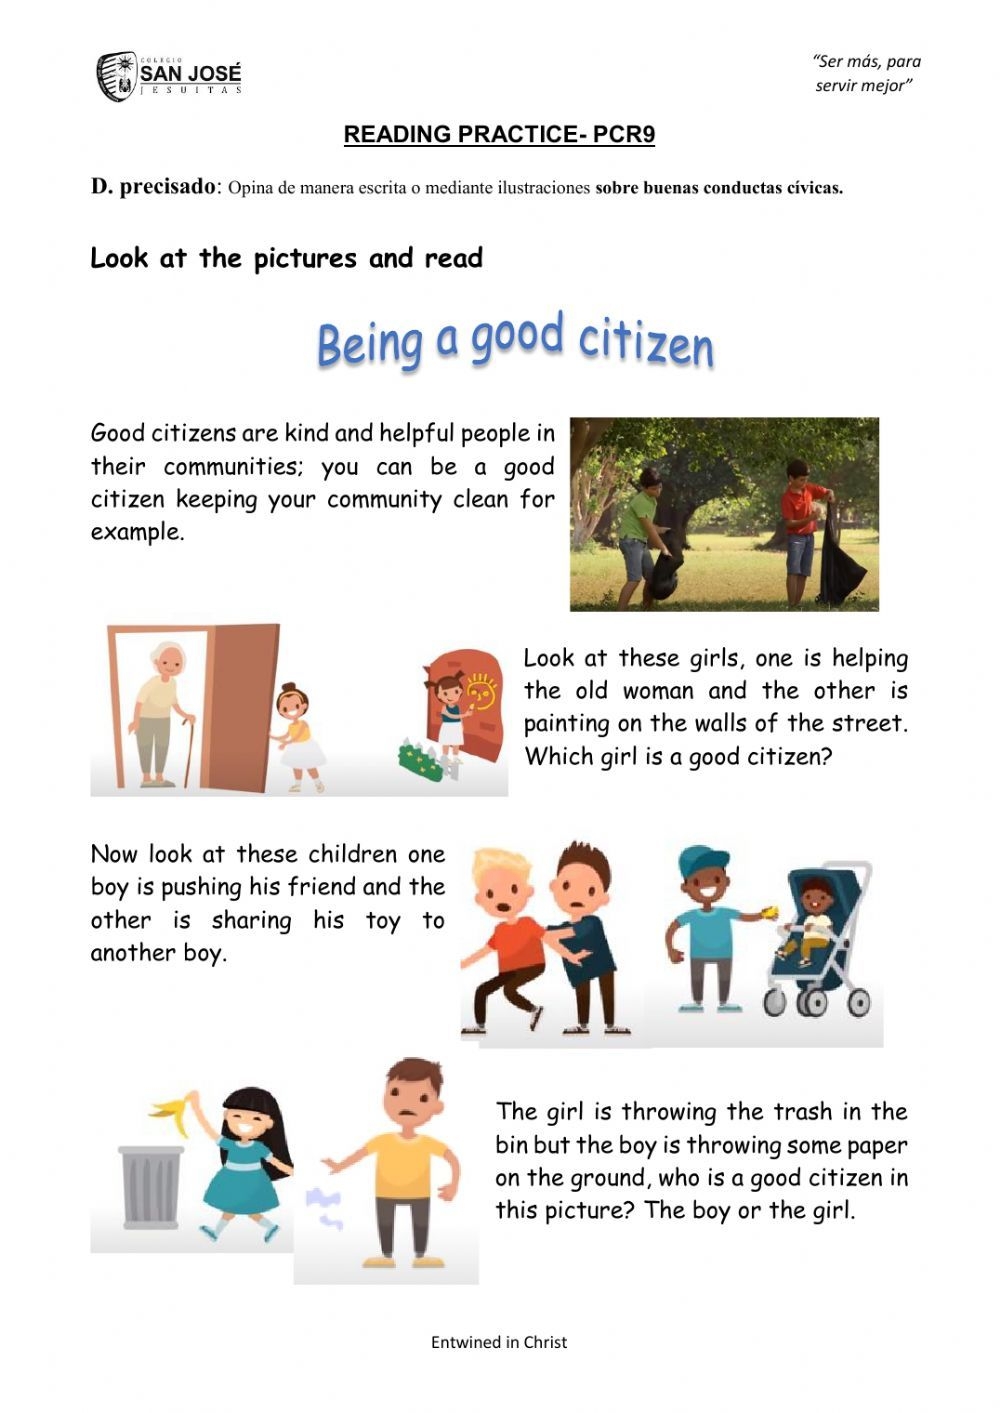 Free Printable Worksheets On Being A Good Citizen